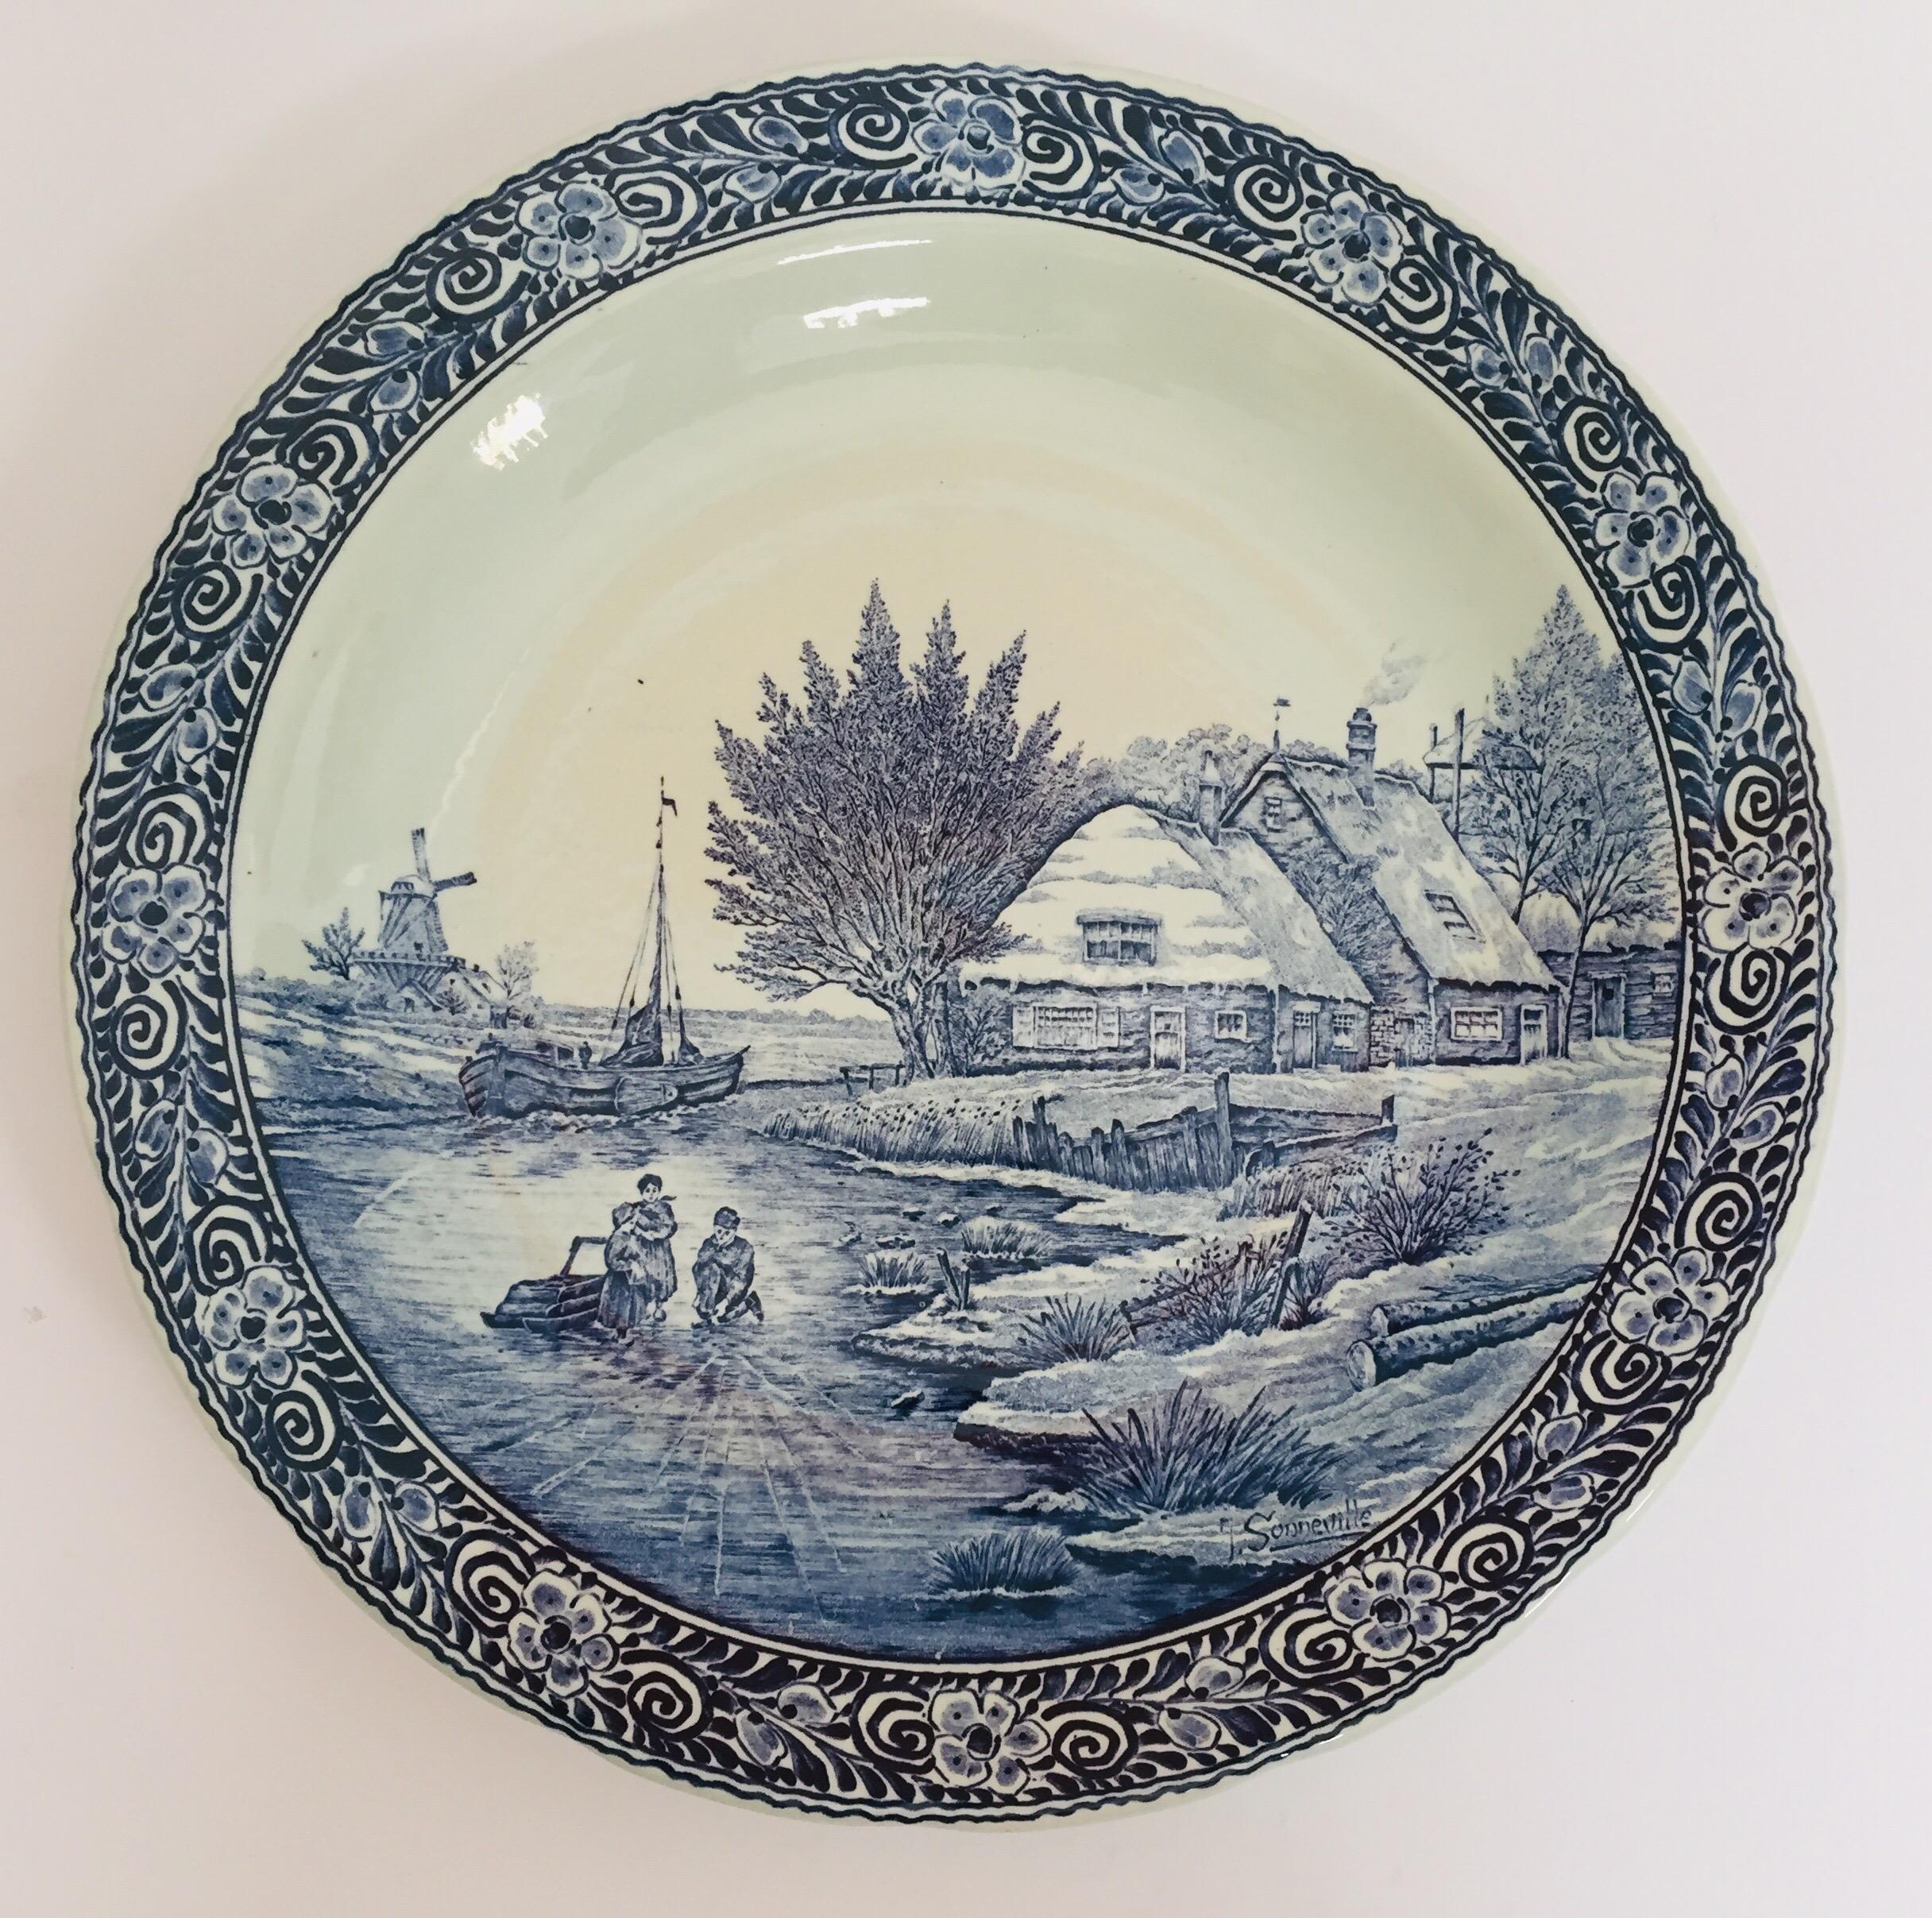 Stunning large Boch Delfts blue and white plate in very good condition.
Beautiful charger that is in perfect condition.
The painting depicts children playing at the edge of a frozen river with a boat breaking ice in the background. It is signed by